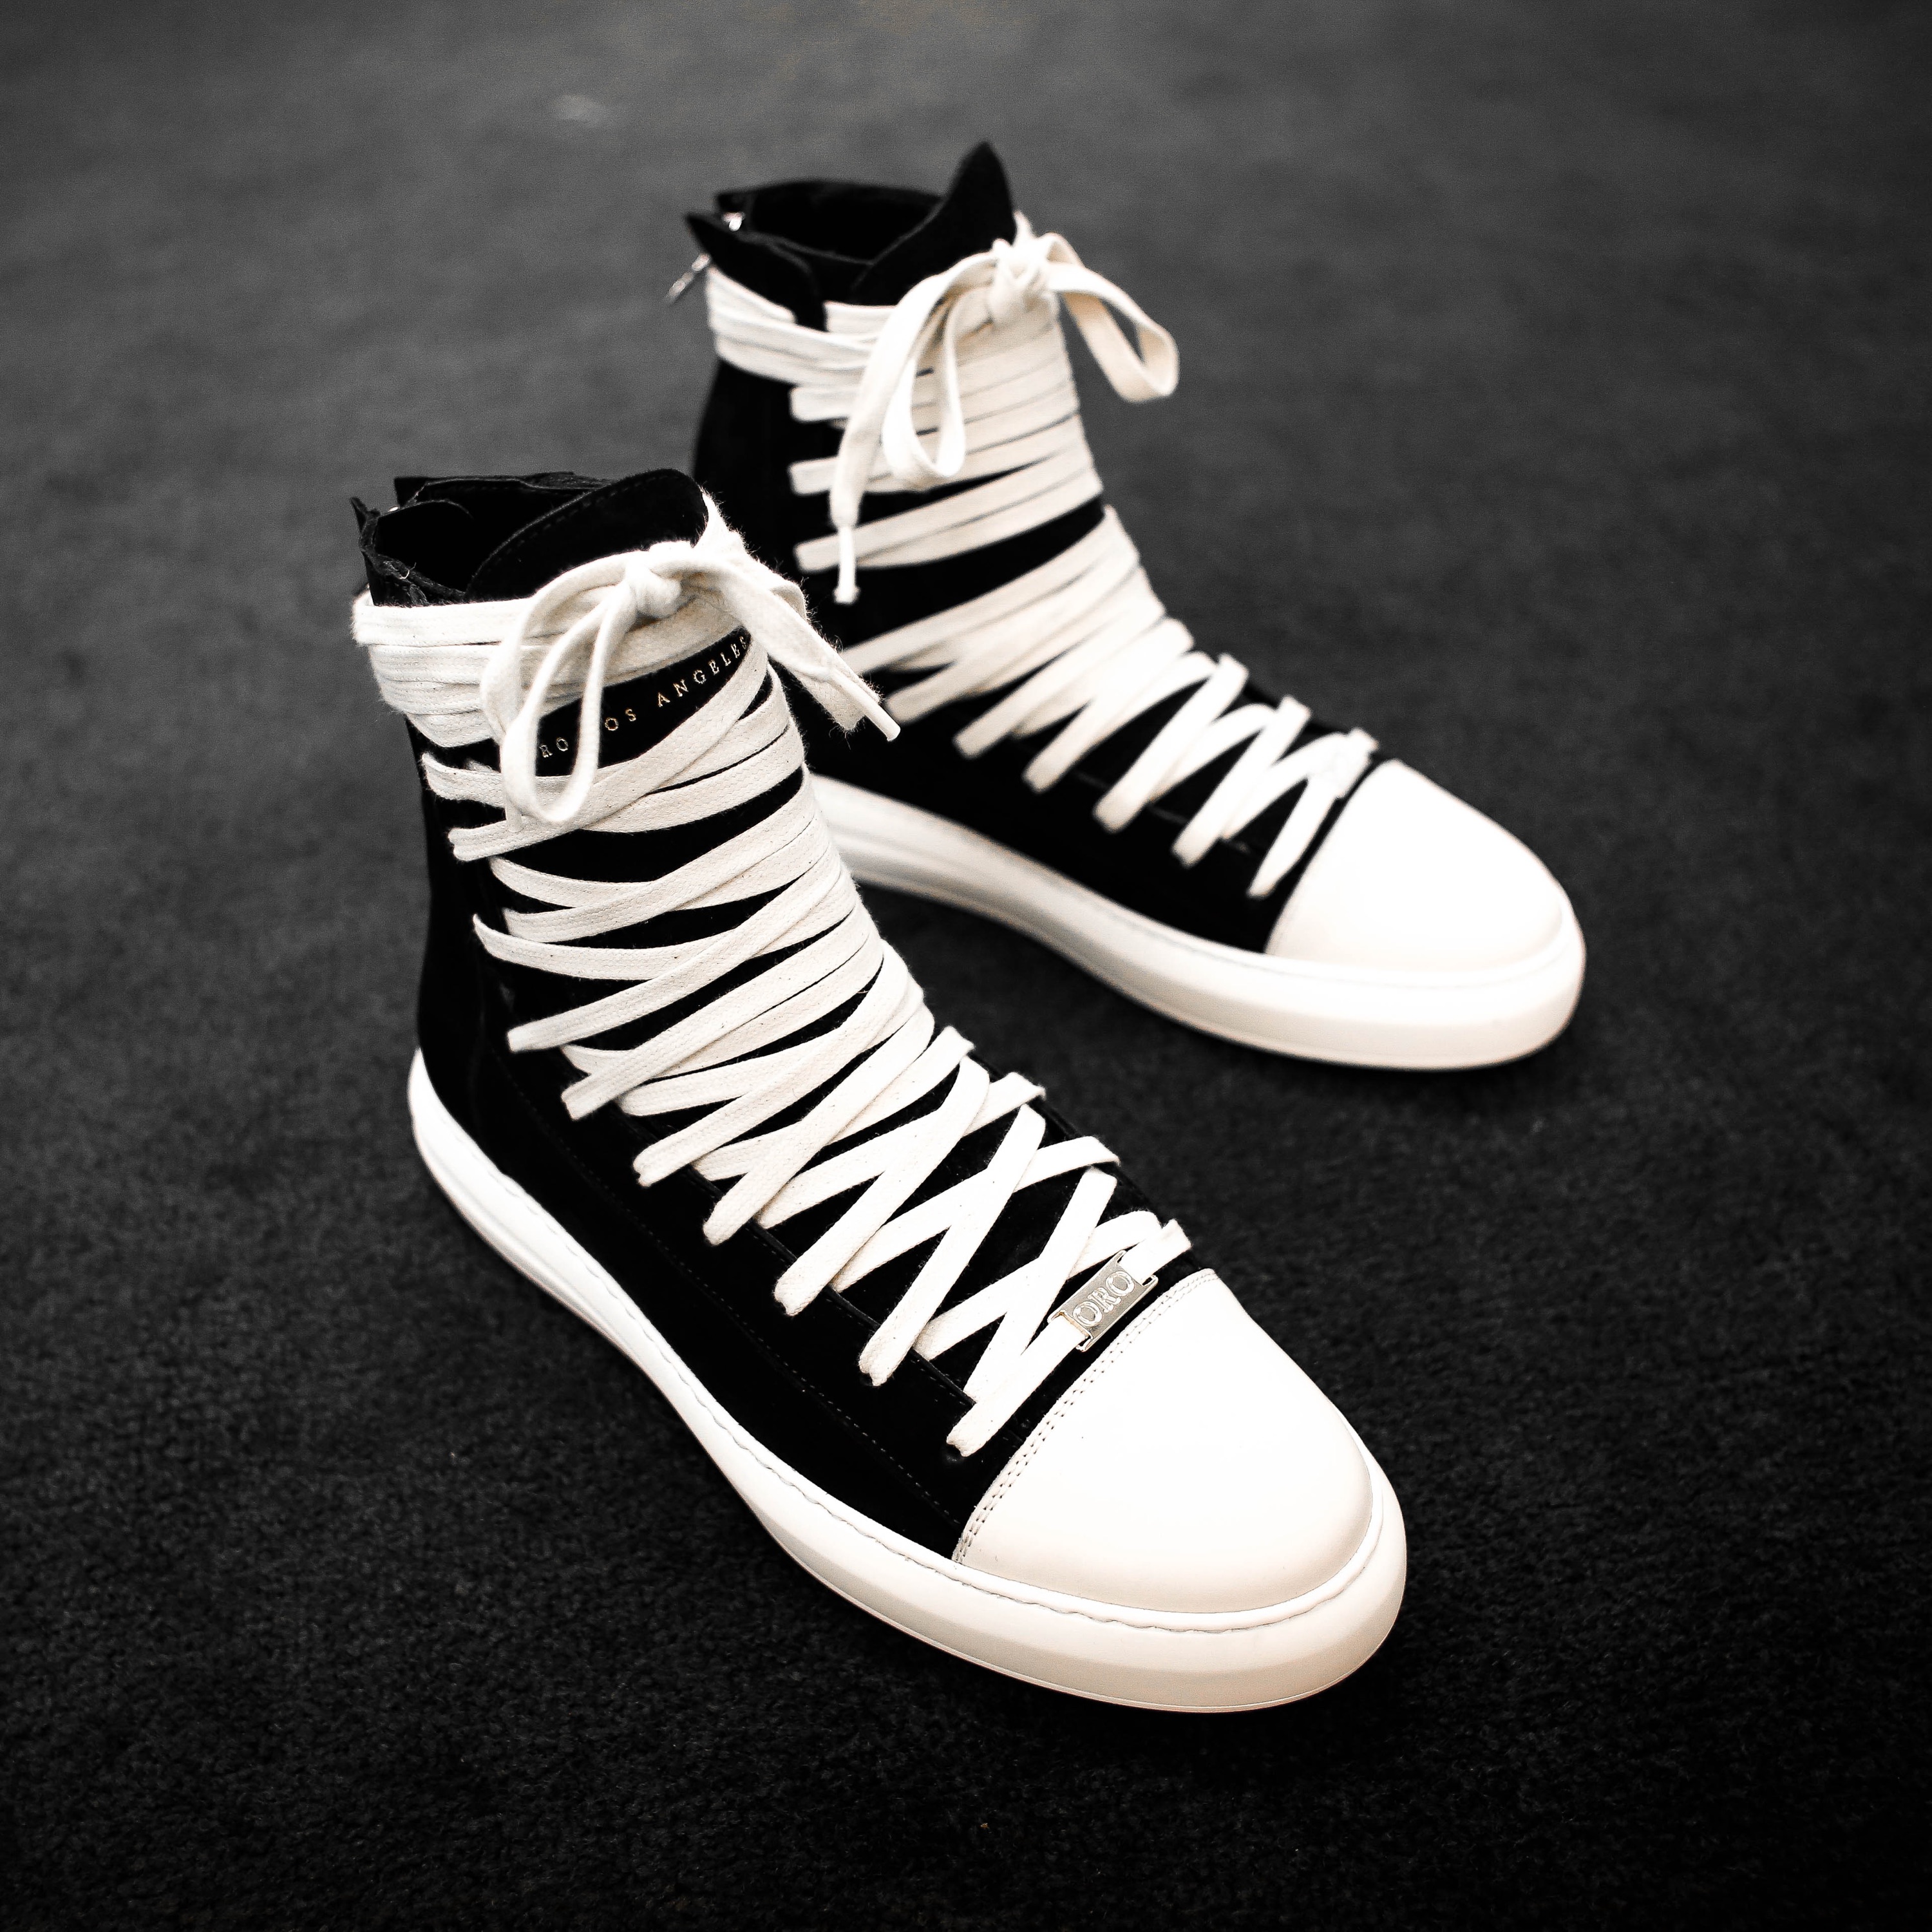 ORO Los Angeles Launches New Sneakers